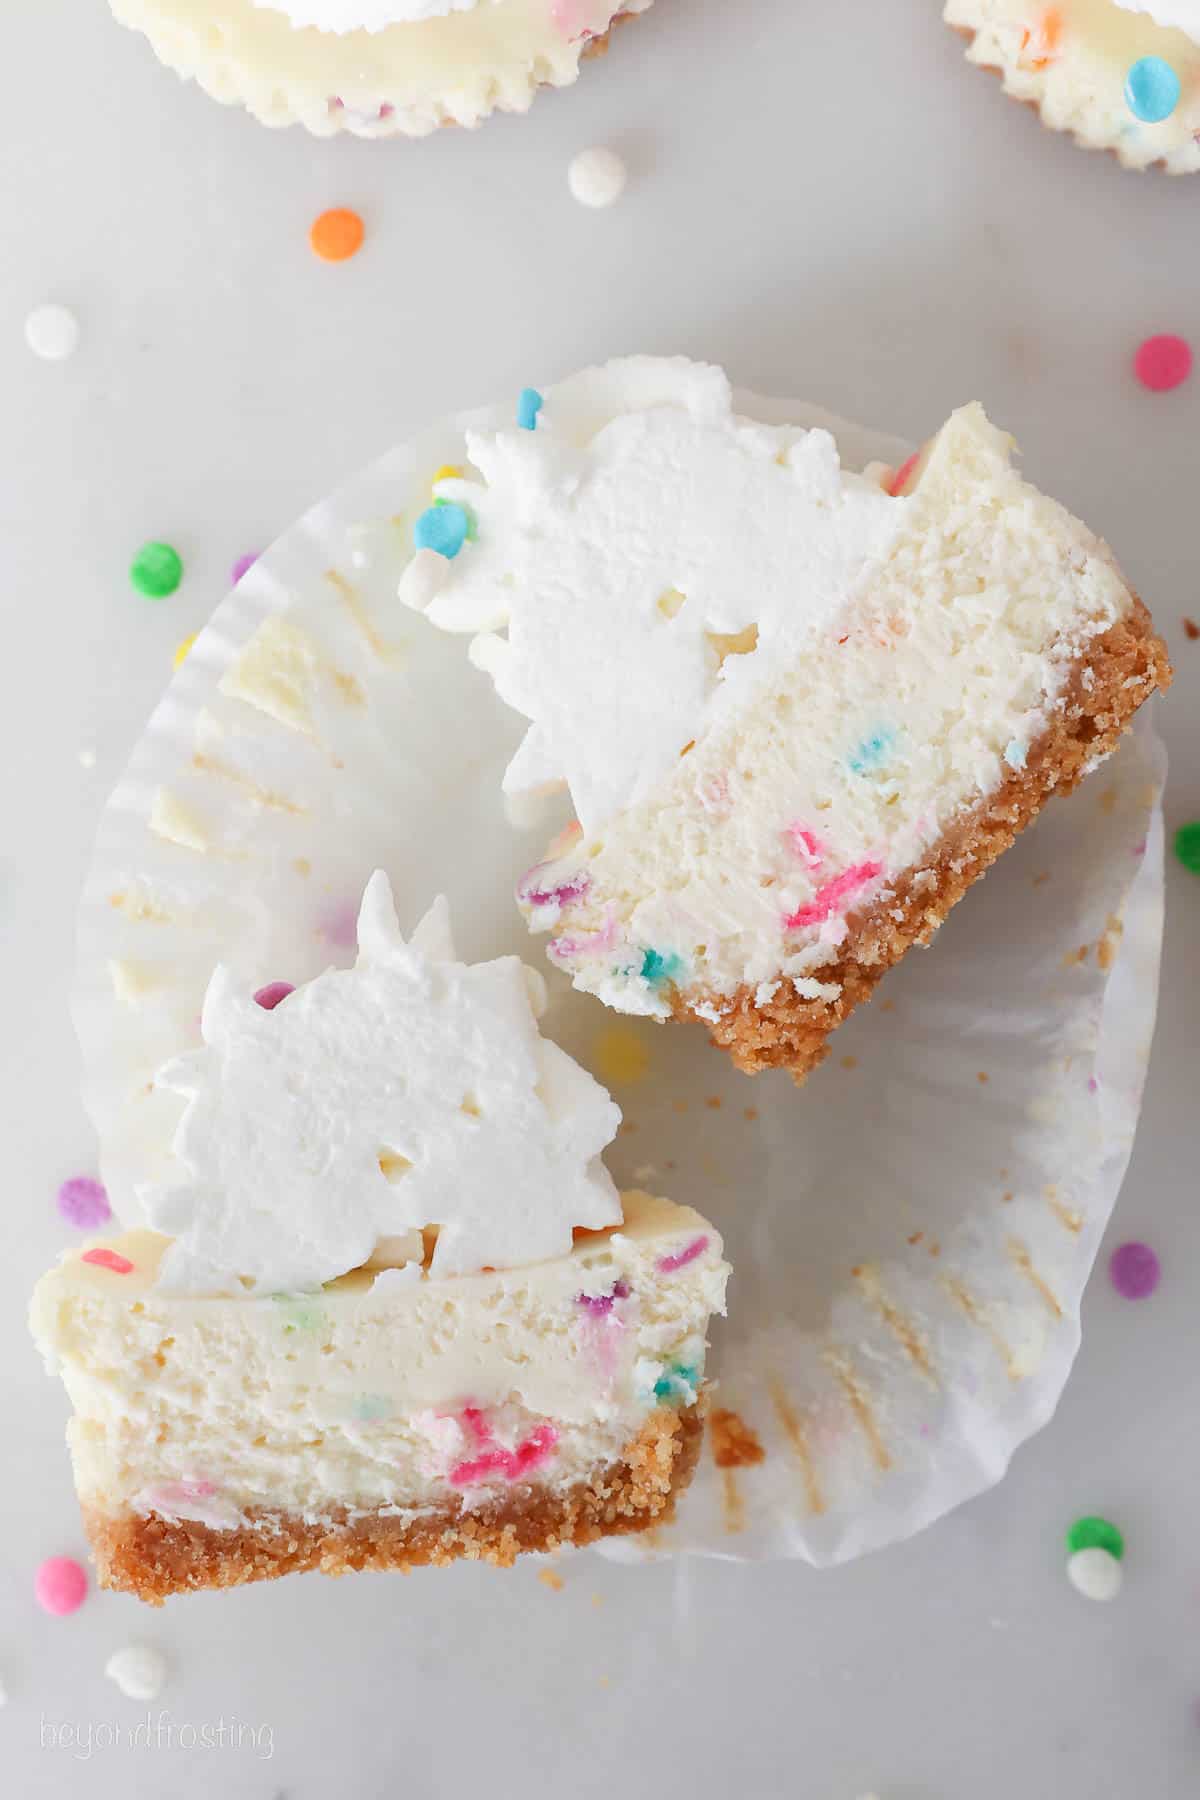 Overhead view of an unwrapped, frosted mini funfetti cheesecake cut in half.